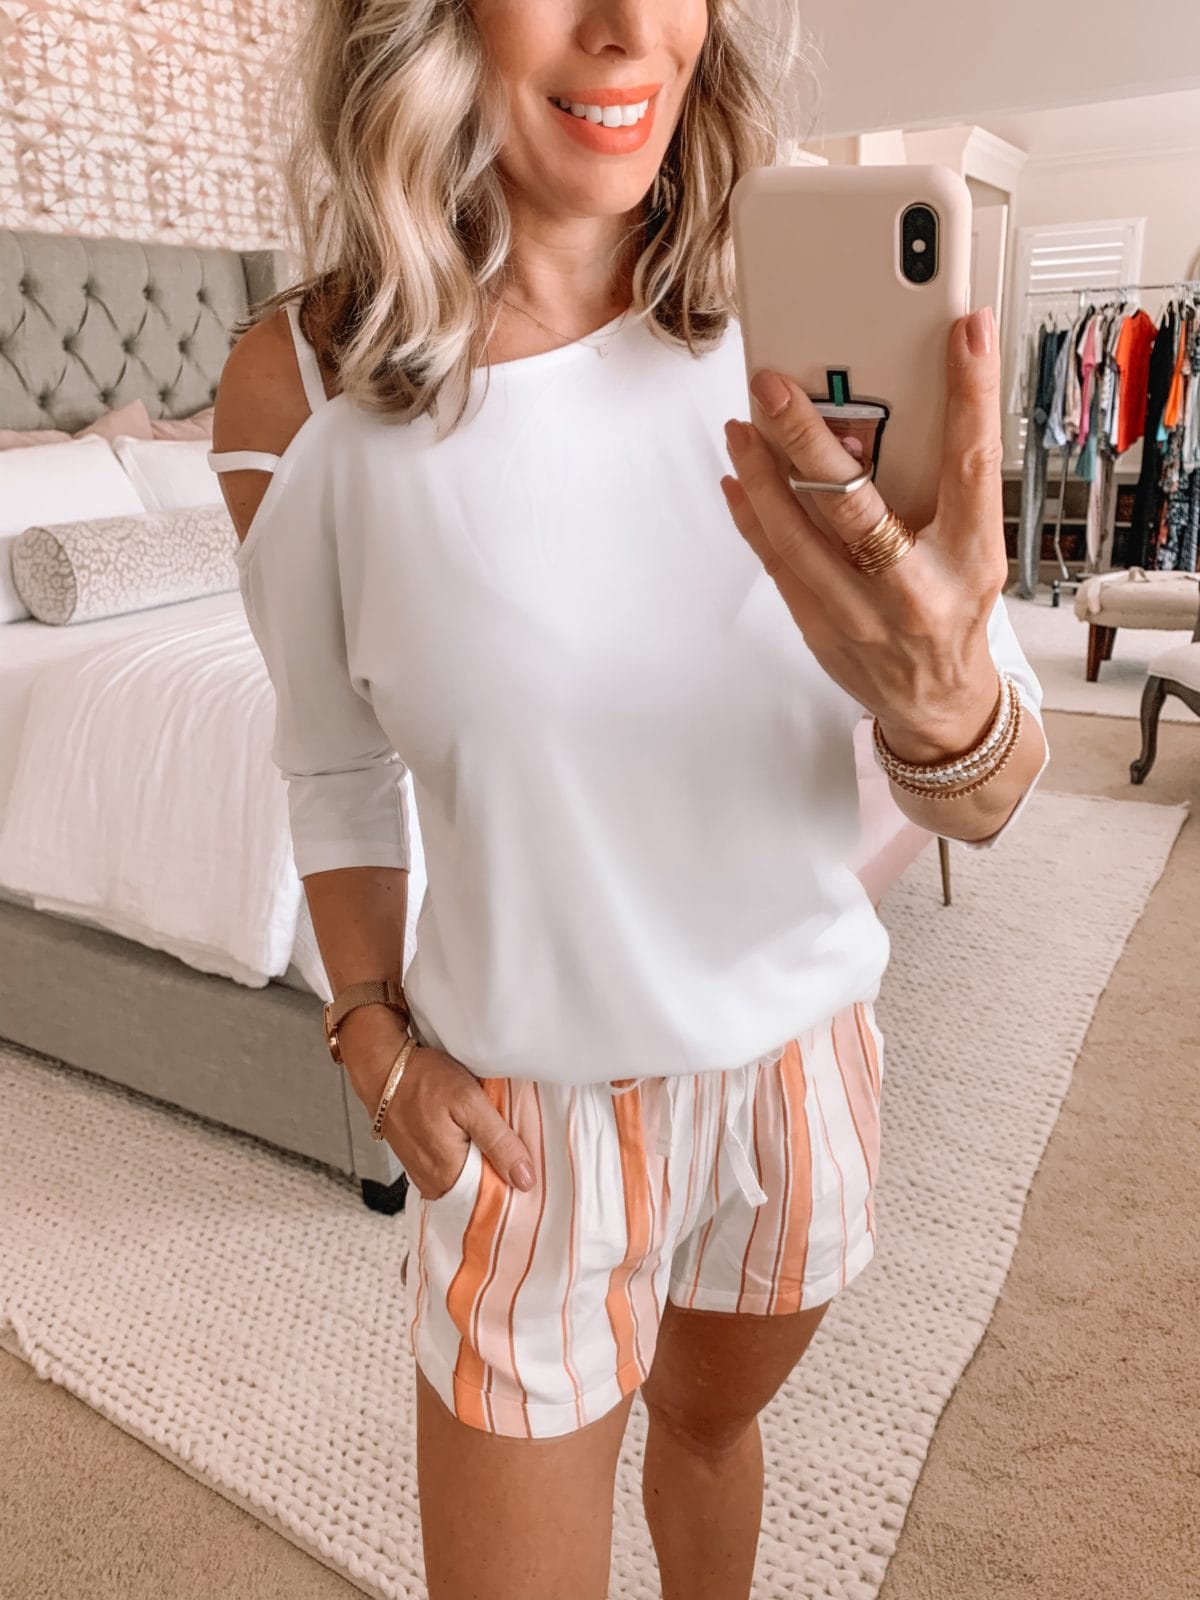 Amazon Fashion Finds, One Shoulder Strappy Top, Striped Shorts